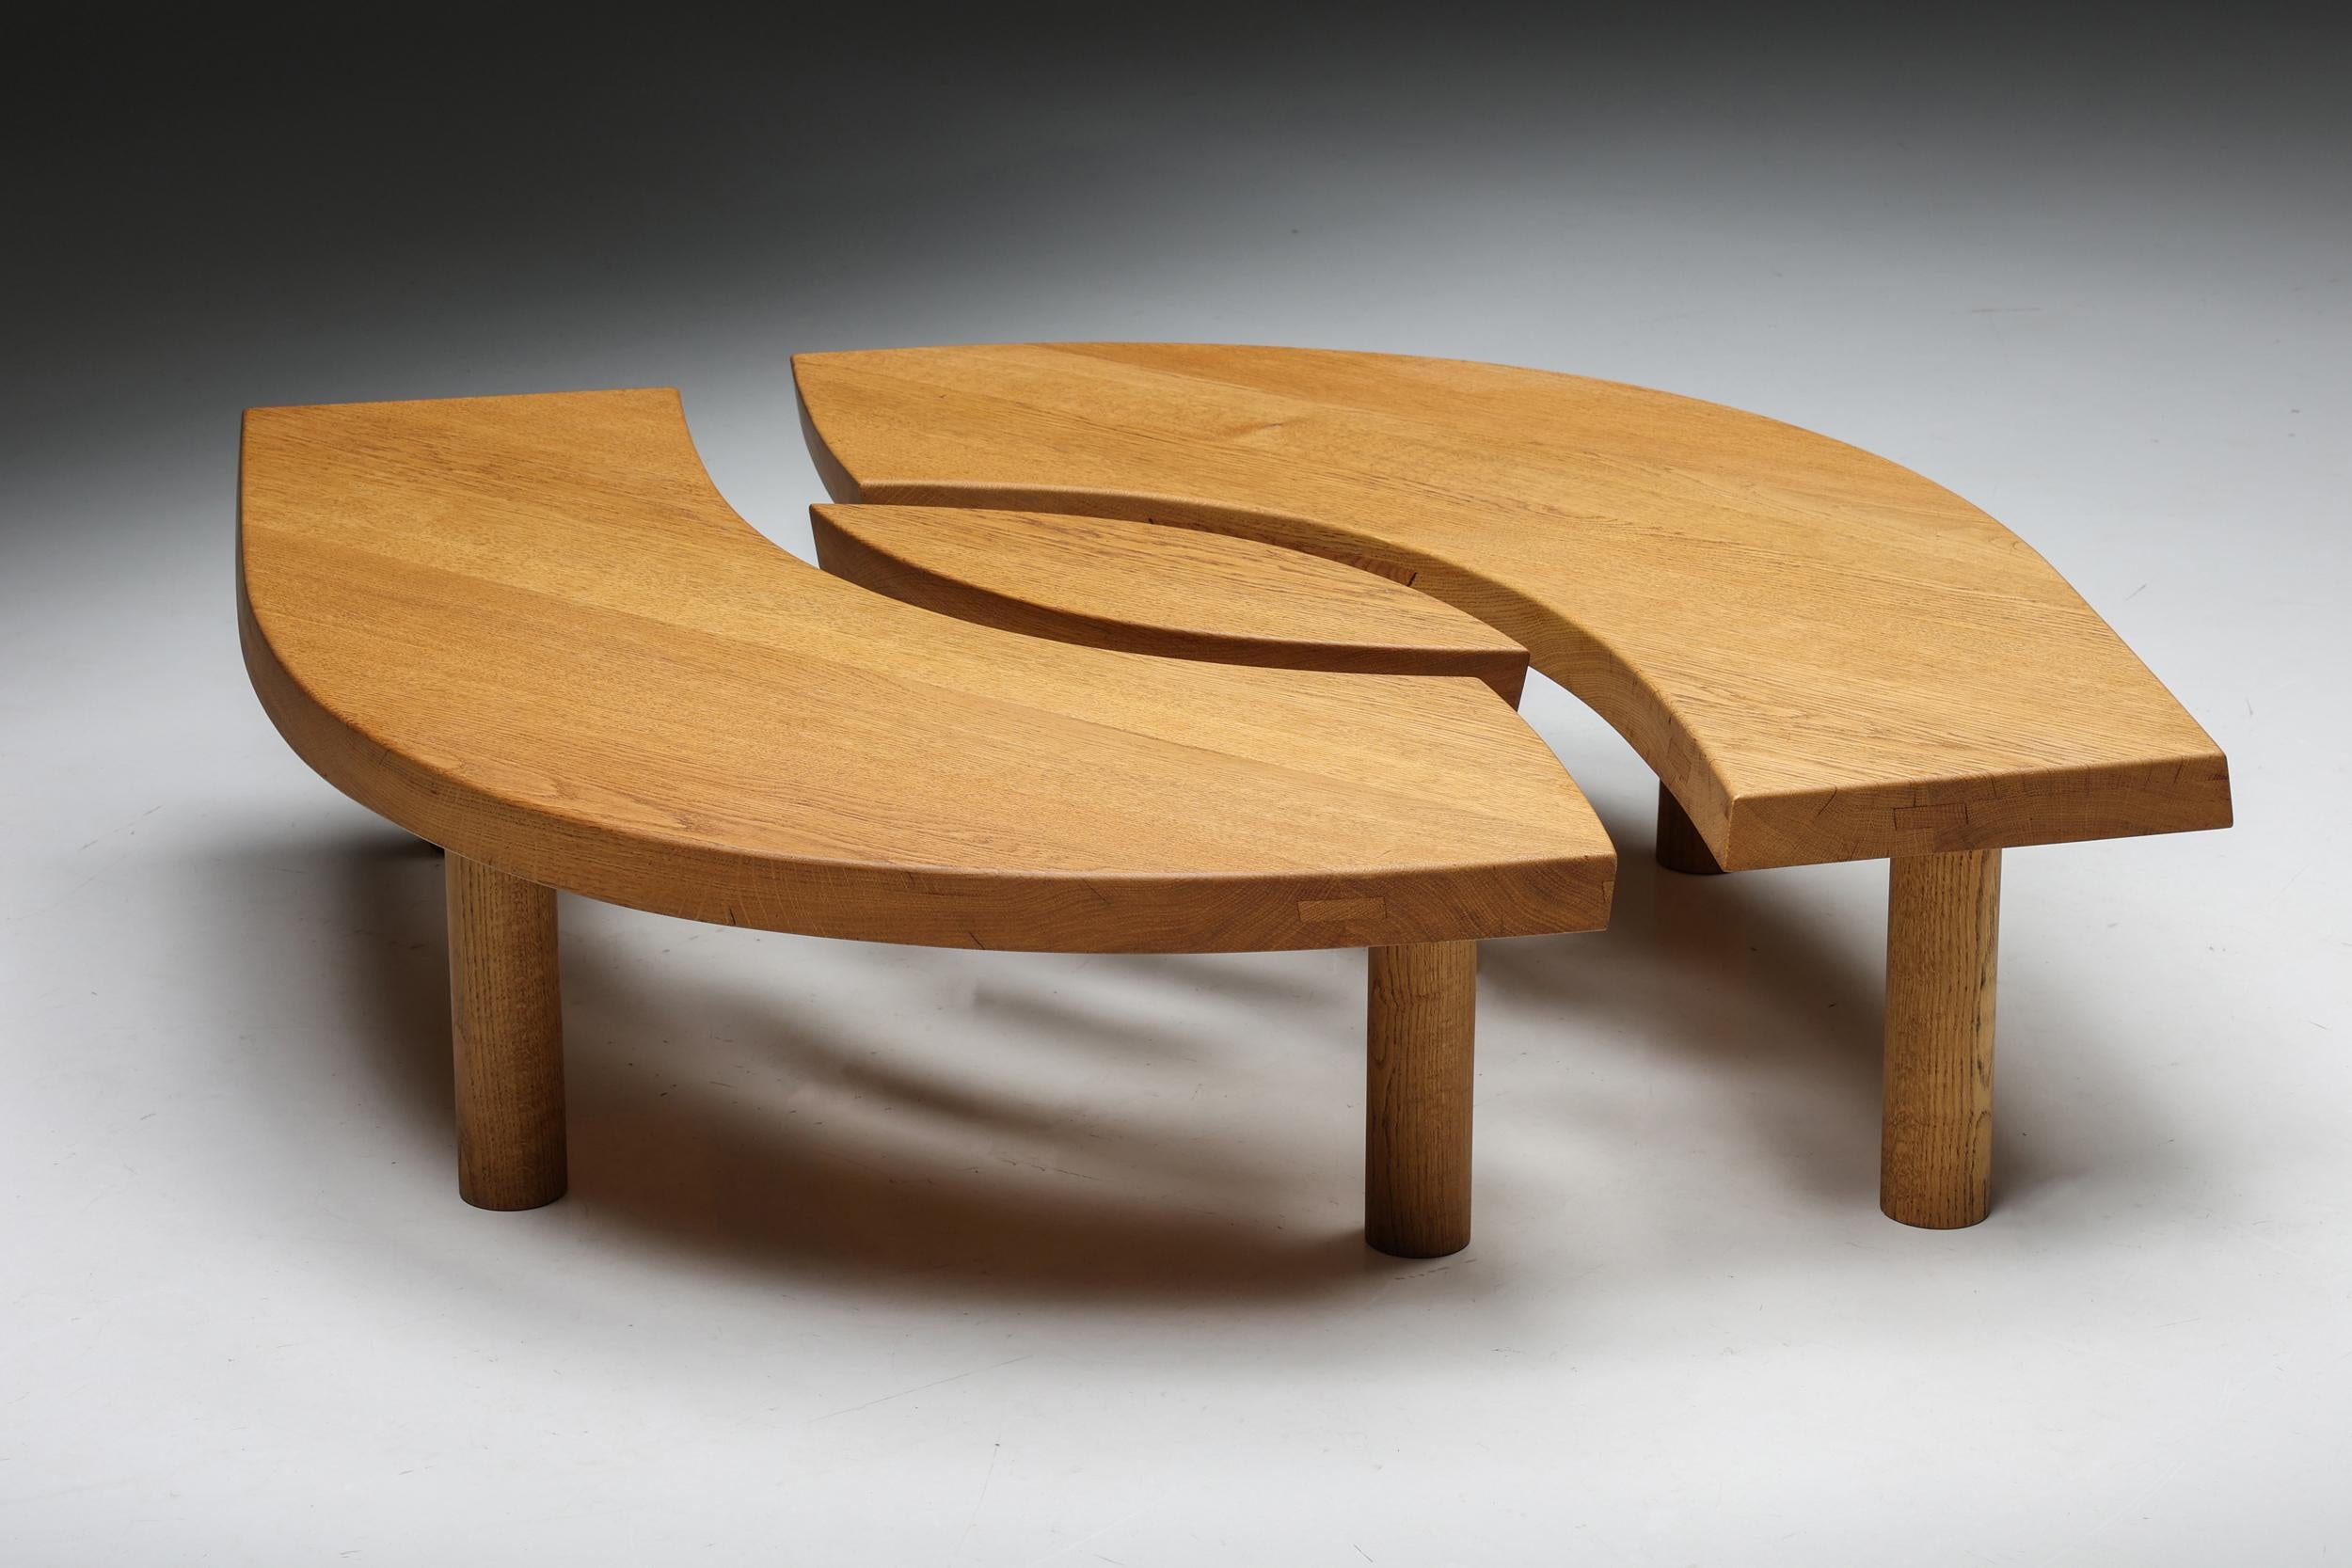 Pierre Chapo; Coffee Table; Side Table; Cocktail Table; Living Room; Model T22C; France; 1972; French Craftsmanship; L’oeil; Oak; Wood; French Design; Charlotte Perriand; Frank Lloyd Wright; Le Corbusier; Bauhaus; Woodworker; 

This eye-shaped